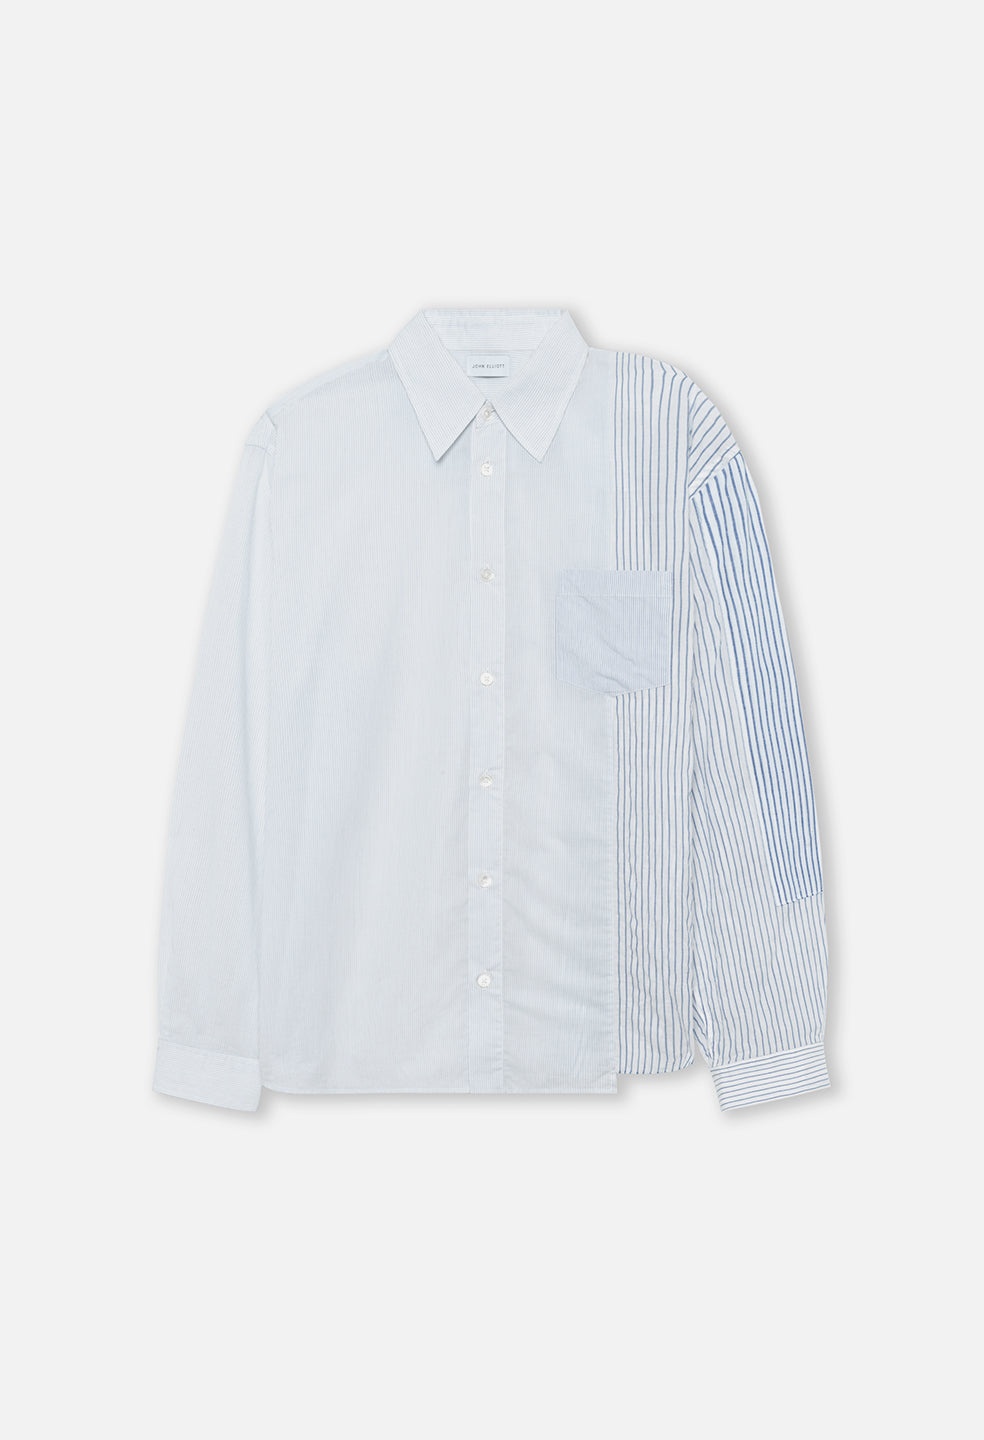 PANELED BUTTON UP - 1